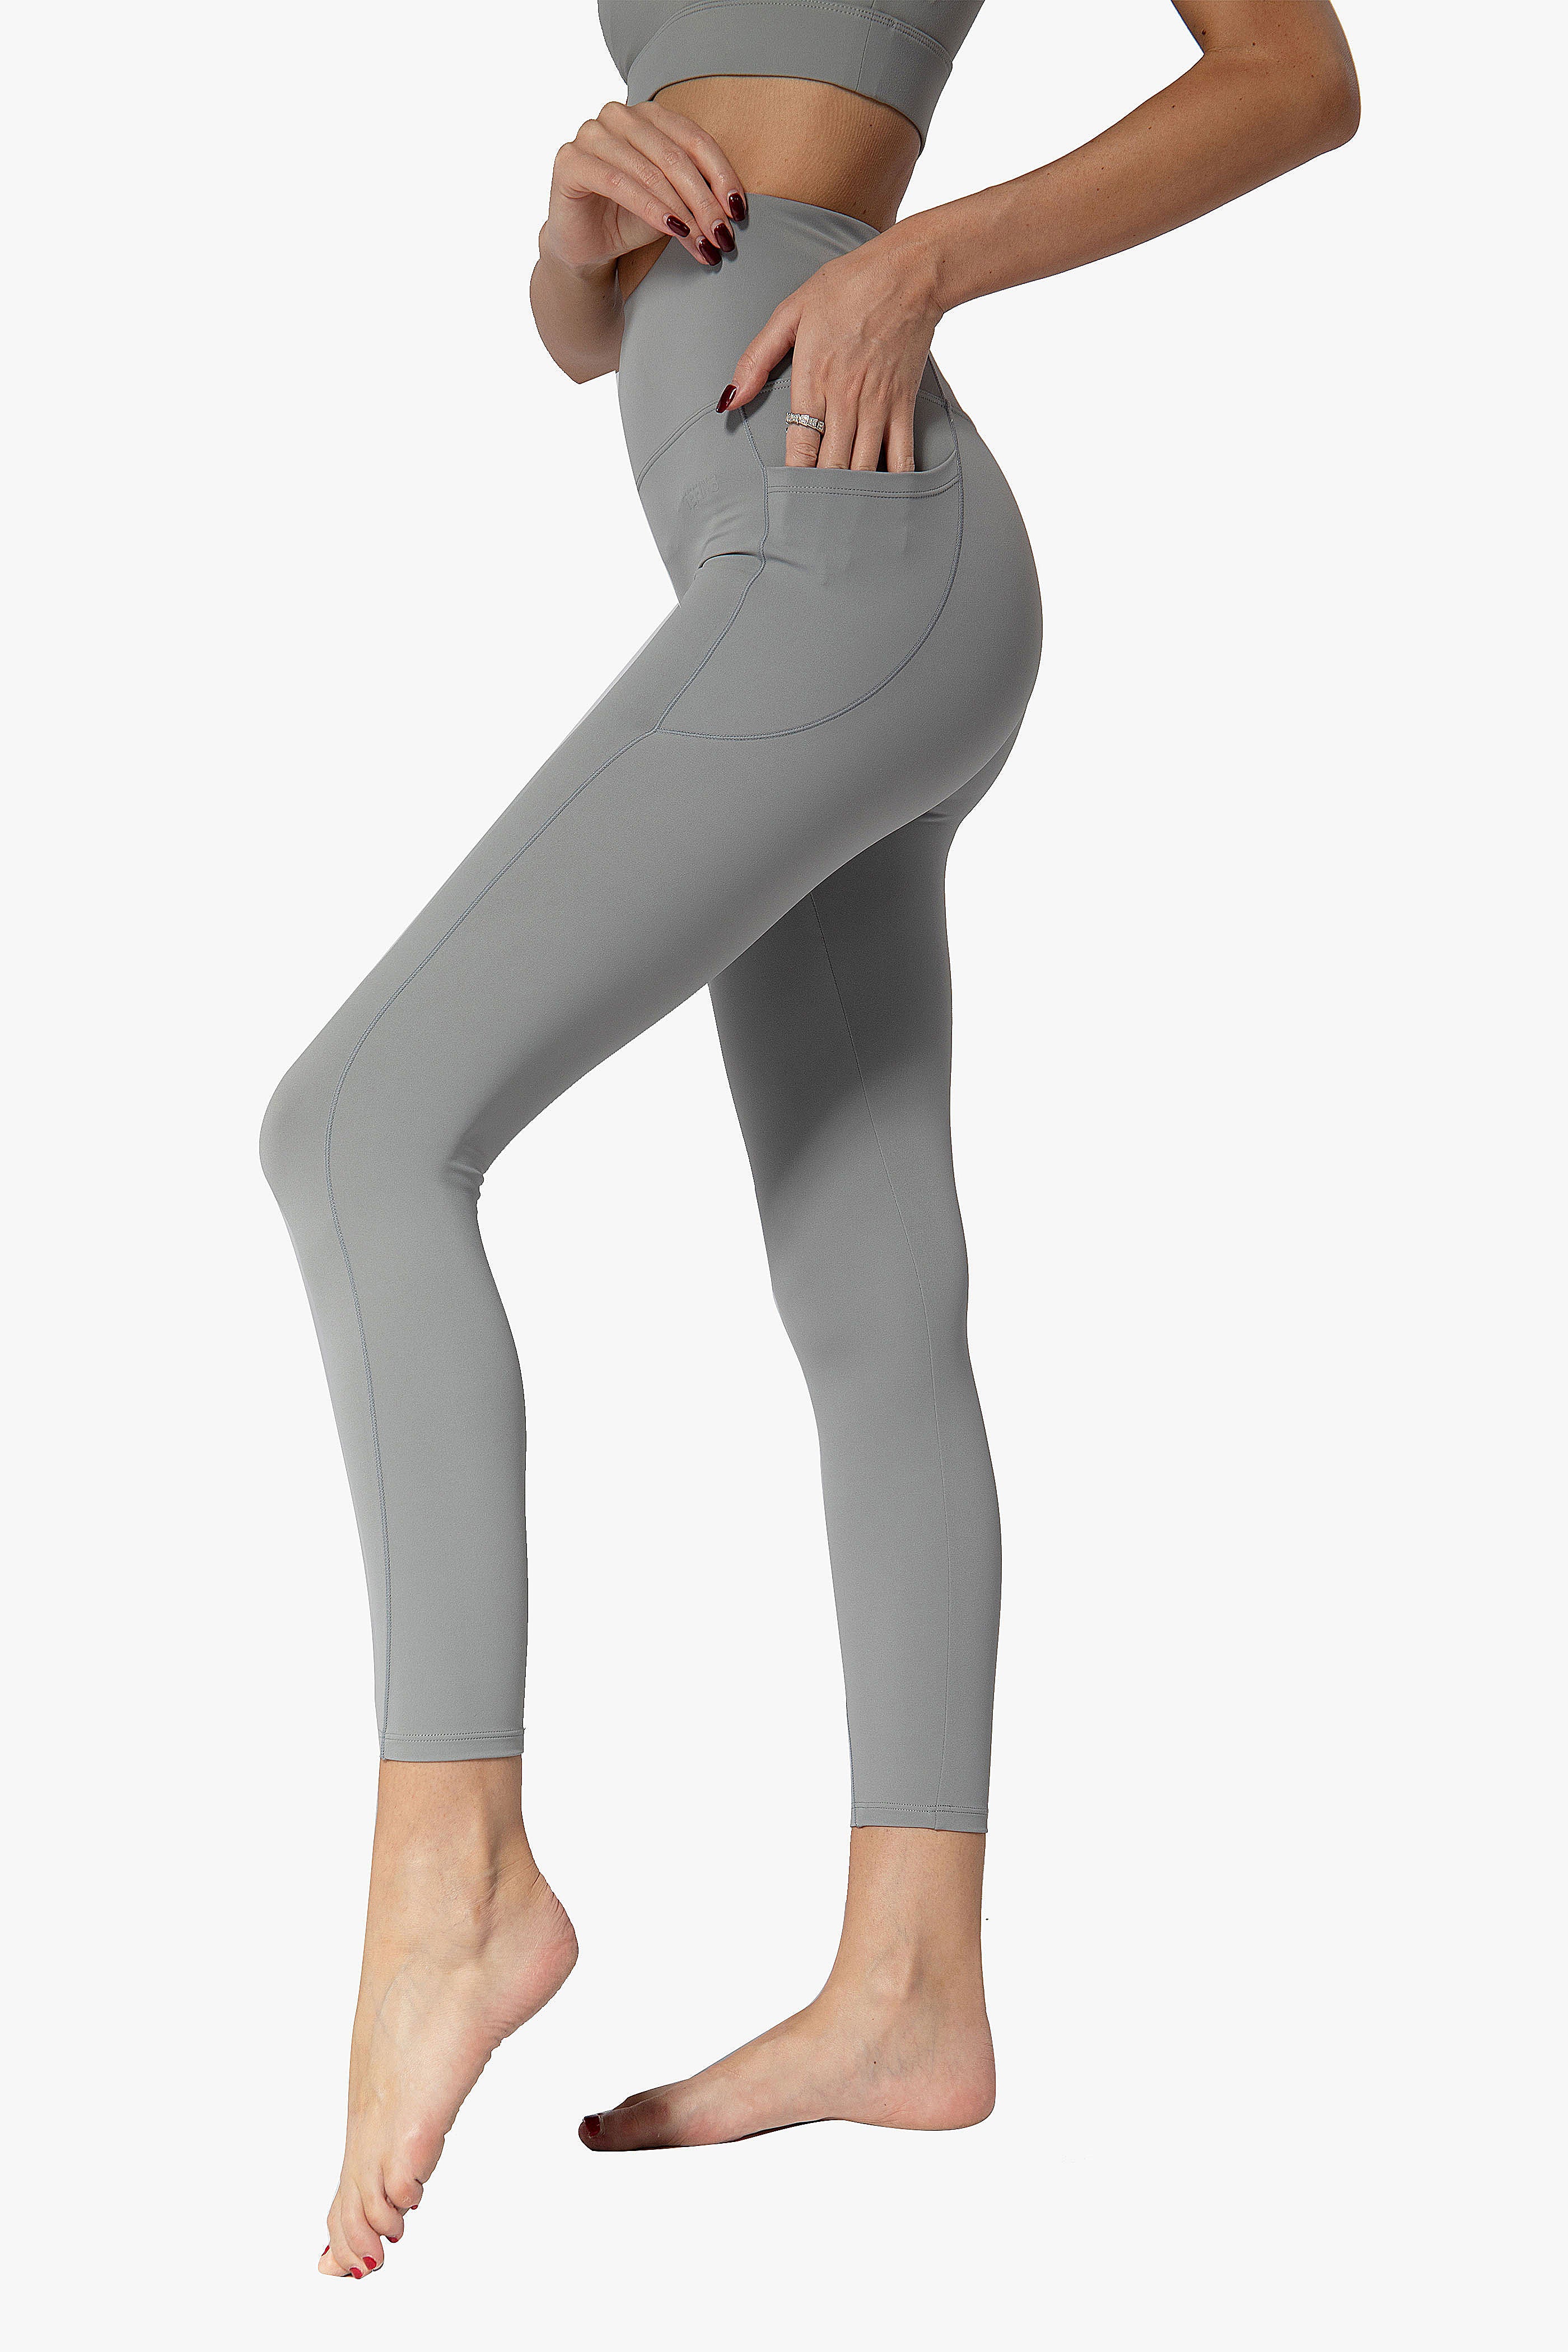 TEFIN3 Comfy Seamless High Waisted Scrunch Leggings with Tummy Control